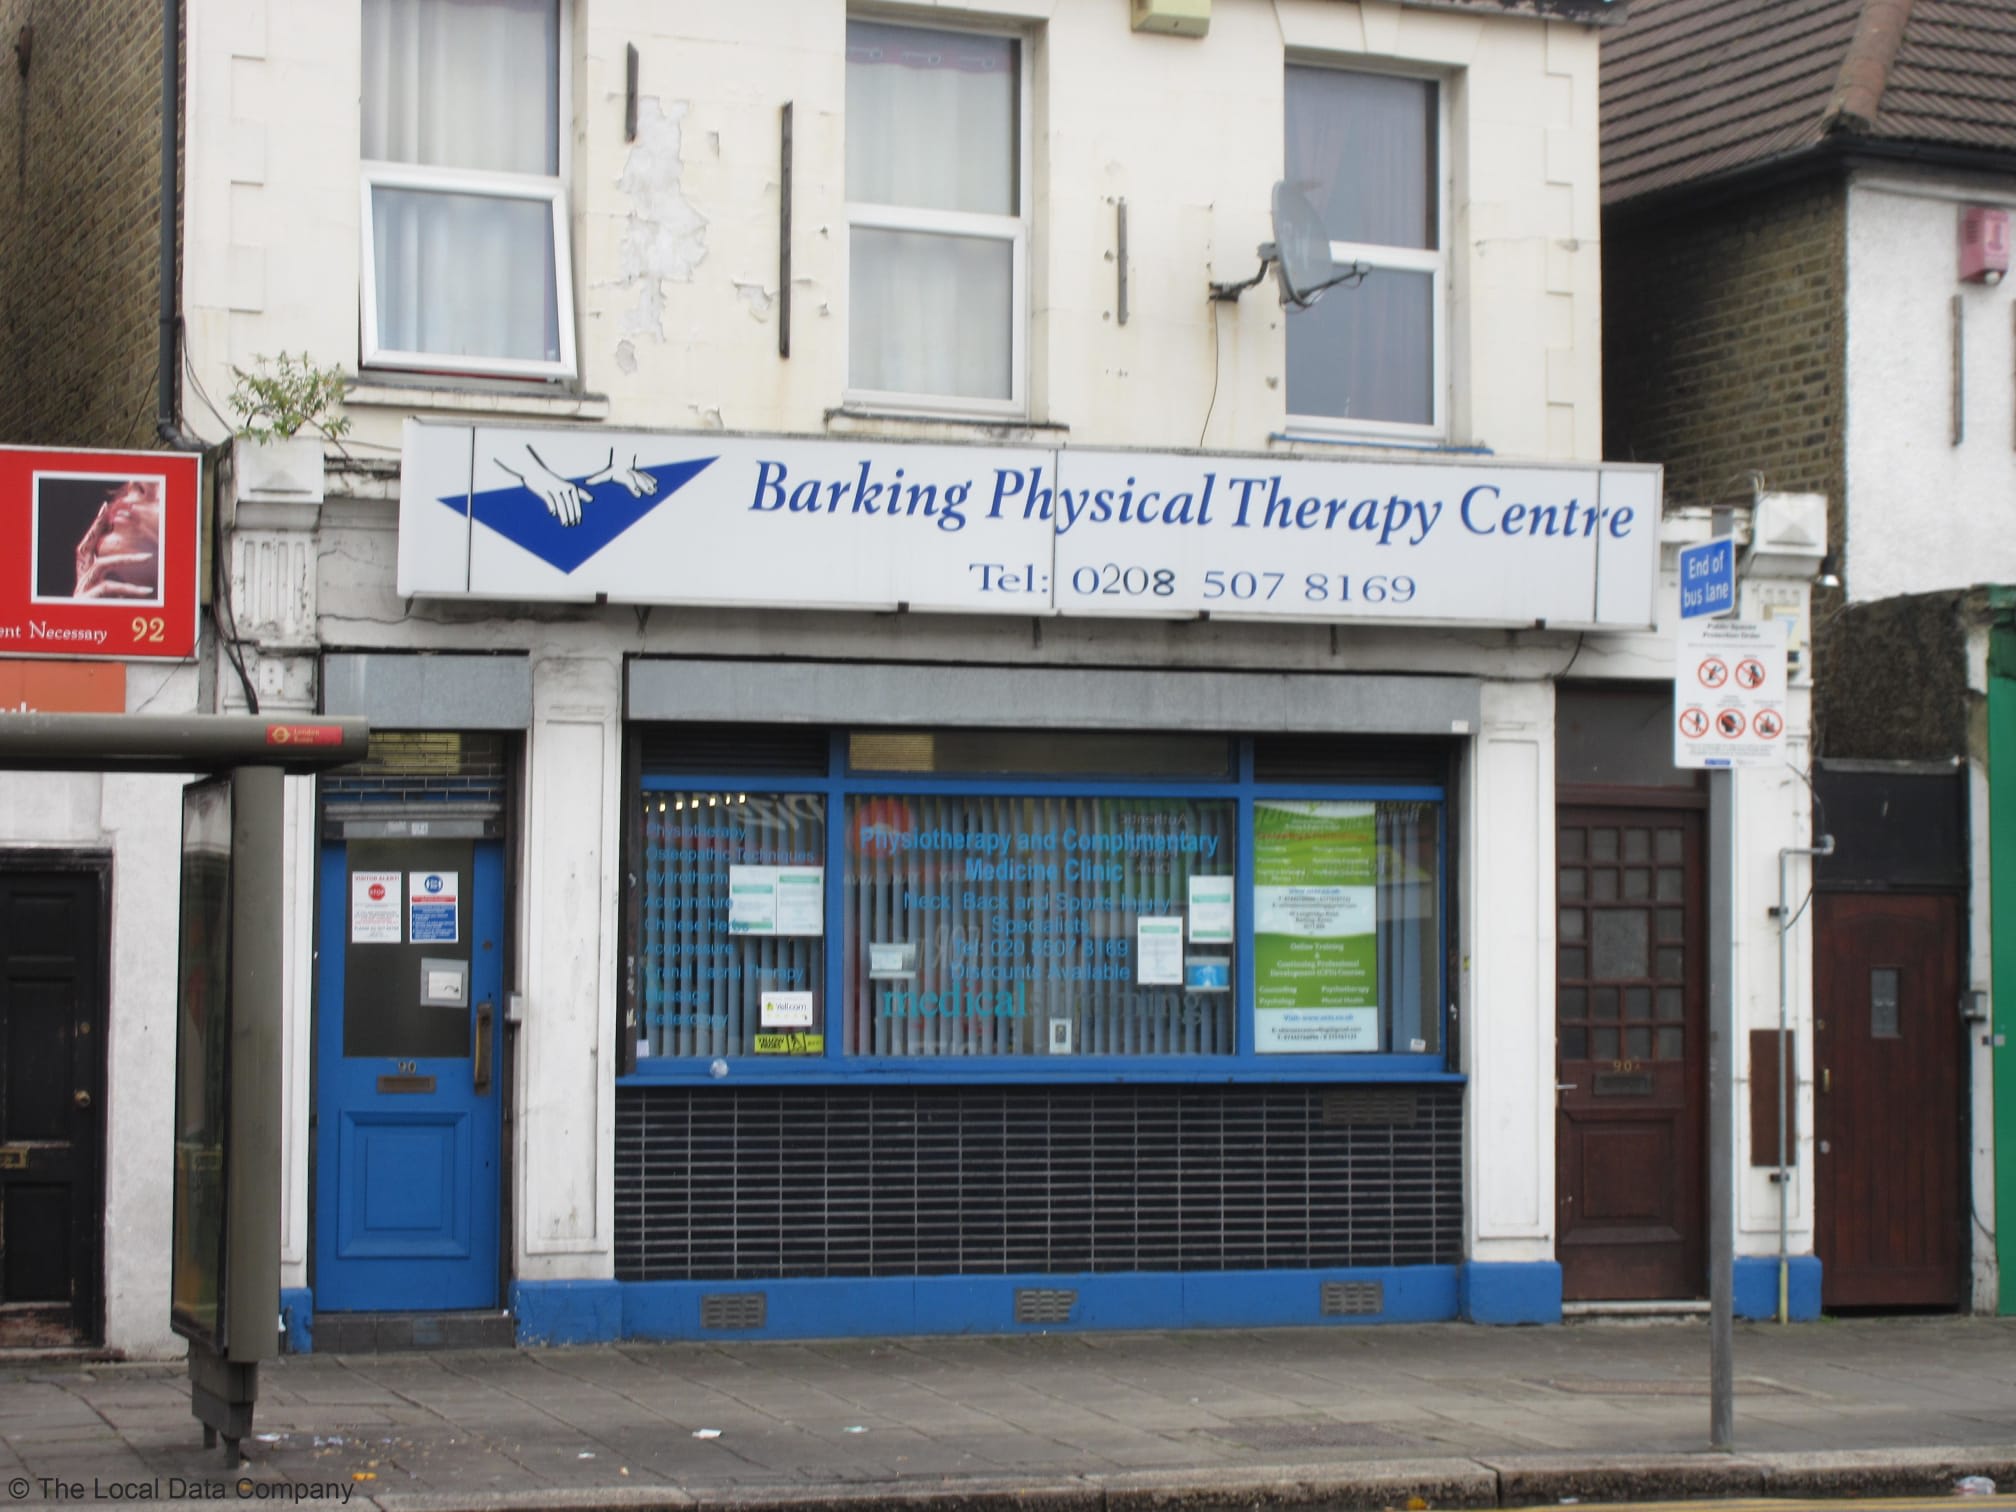 Images The Barking Physical Therapy Centre